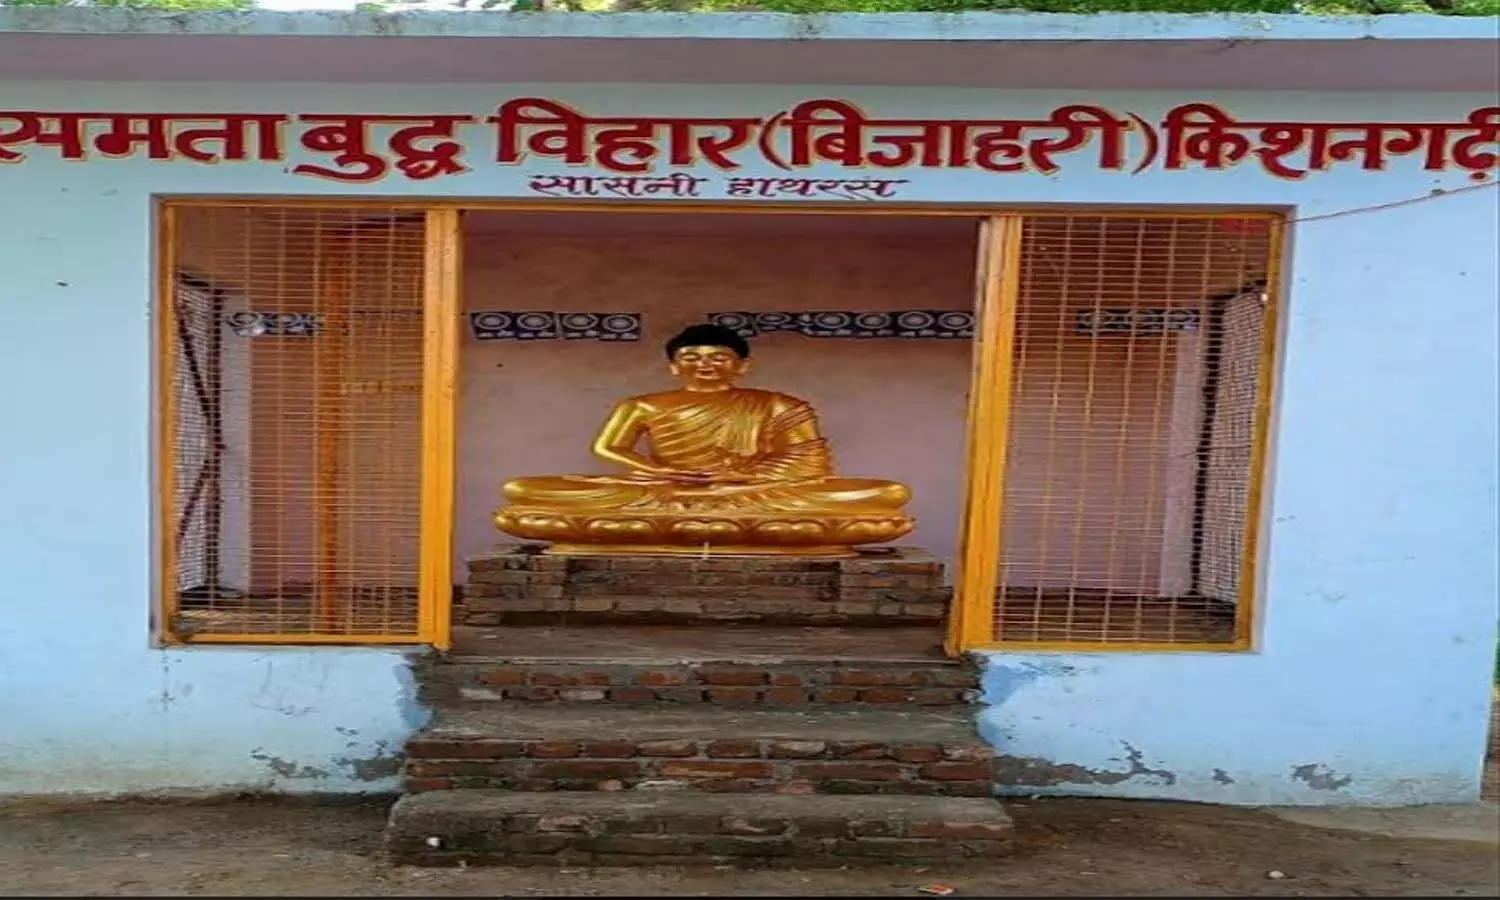 Outrage over vandalizing the statue of Lord Gautam Buddha, the nominee arrested